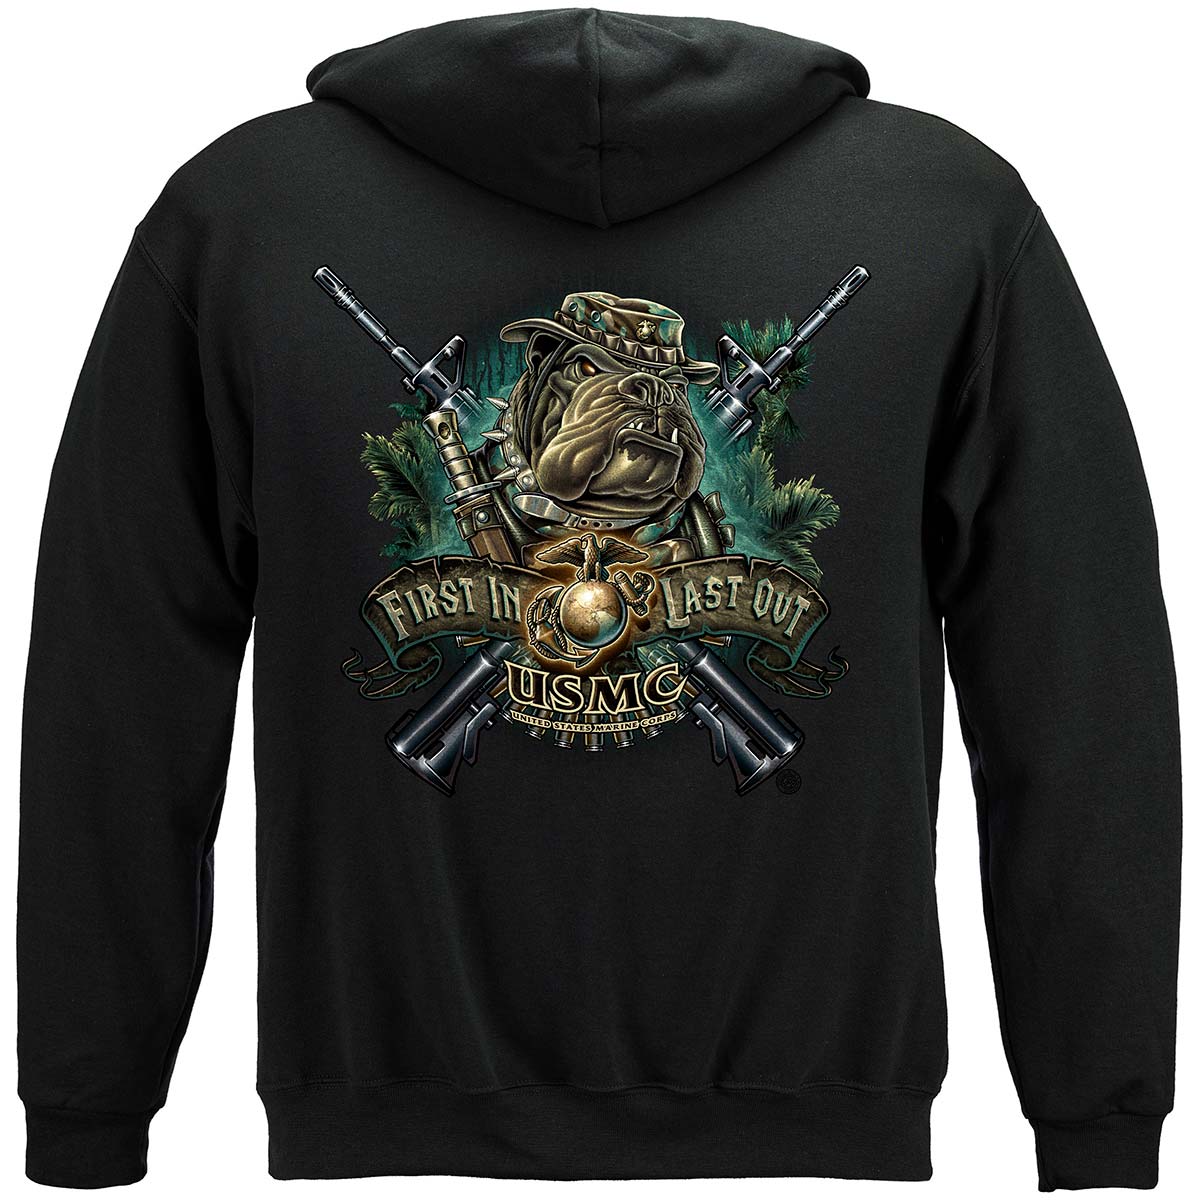 Marine Devil Dog First In Last Out Premium T-Shirt